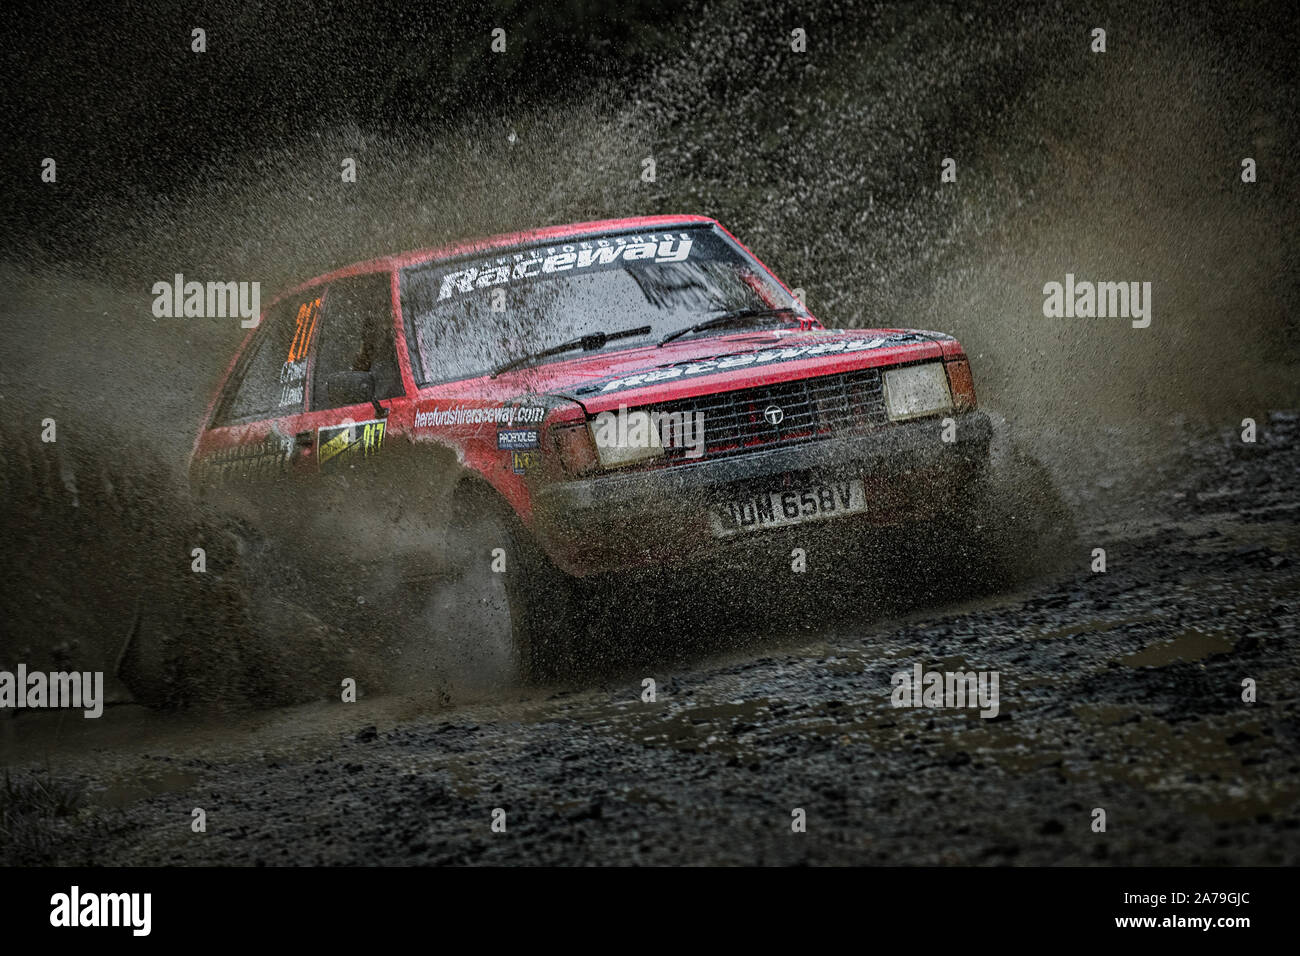 Chris Powell driving his Talbot Sunbeam through a watersplash in the 2019 WRC Wales Rally GB, Wales, UK Stock Photo